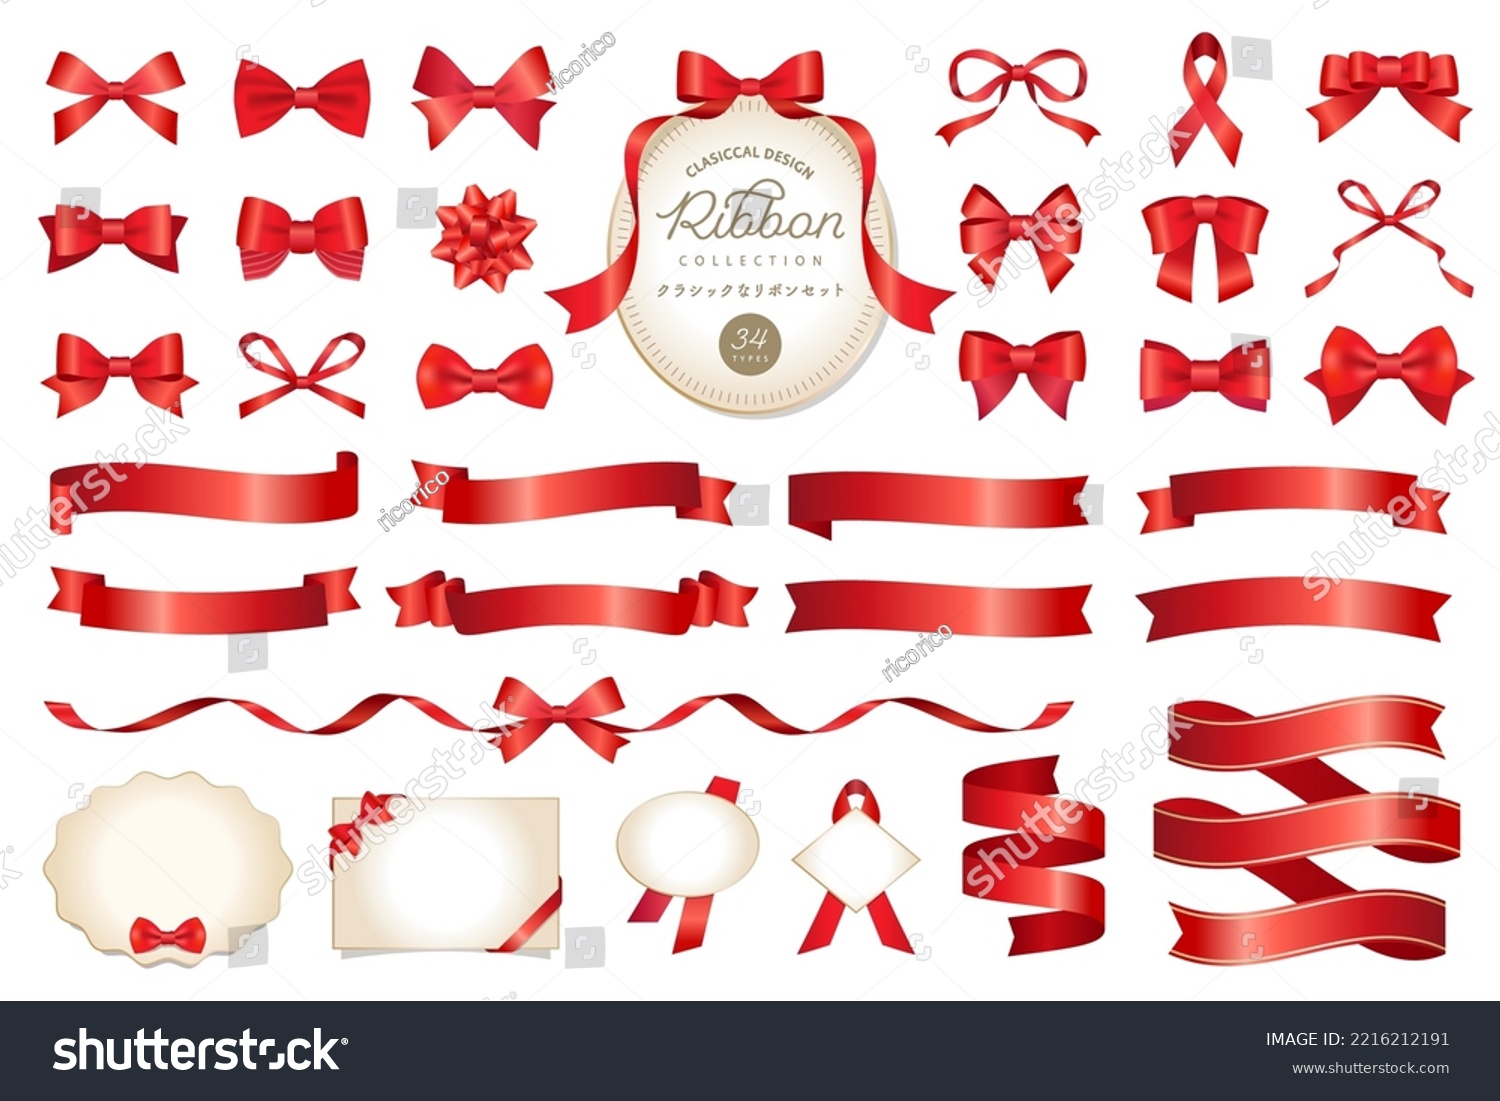 SVG of 34 sets of Red ribbon illustrations. Classic and gorgeous ornaments and frames. Good for Christmas, Valentine's Day, Birthday, Mother's Day, etc. svg